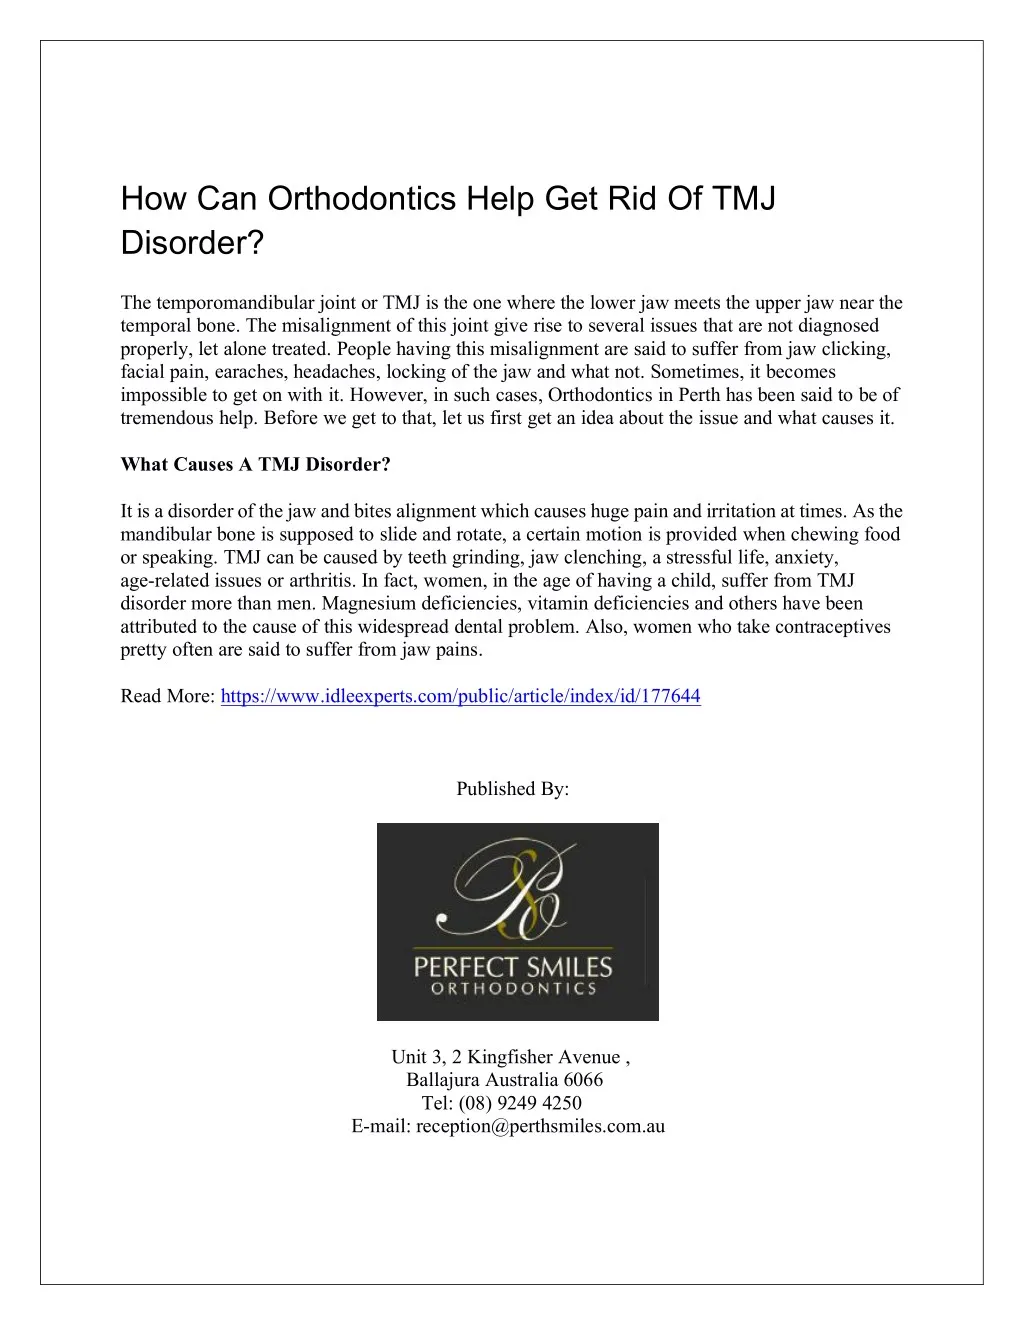 how can orthodontics help get rid of tmj disorder